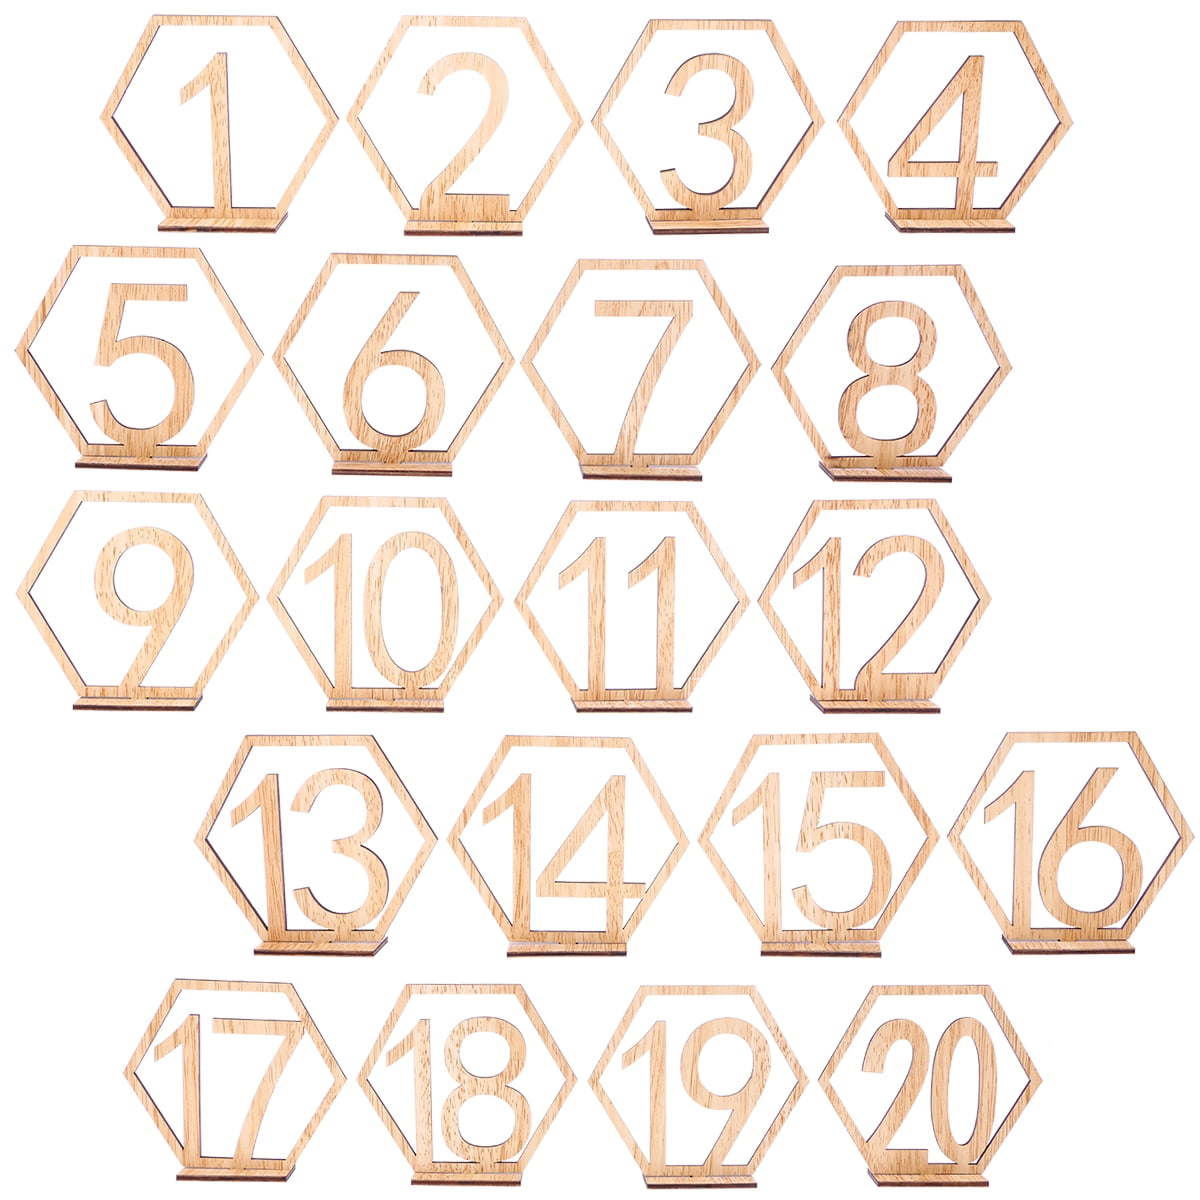 Details about   Wood Wedding Table Numbers 1-20 Hexagonal Wooden Numbers with Holder Base for 